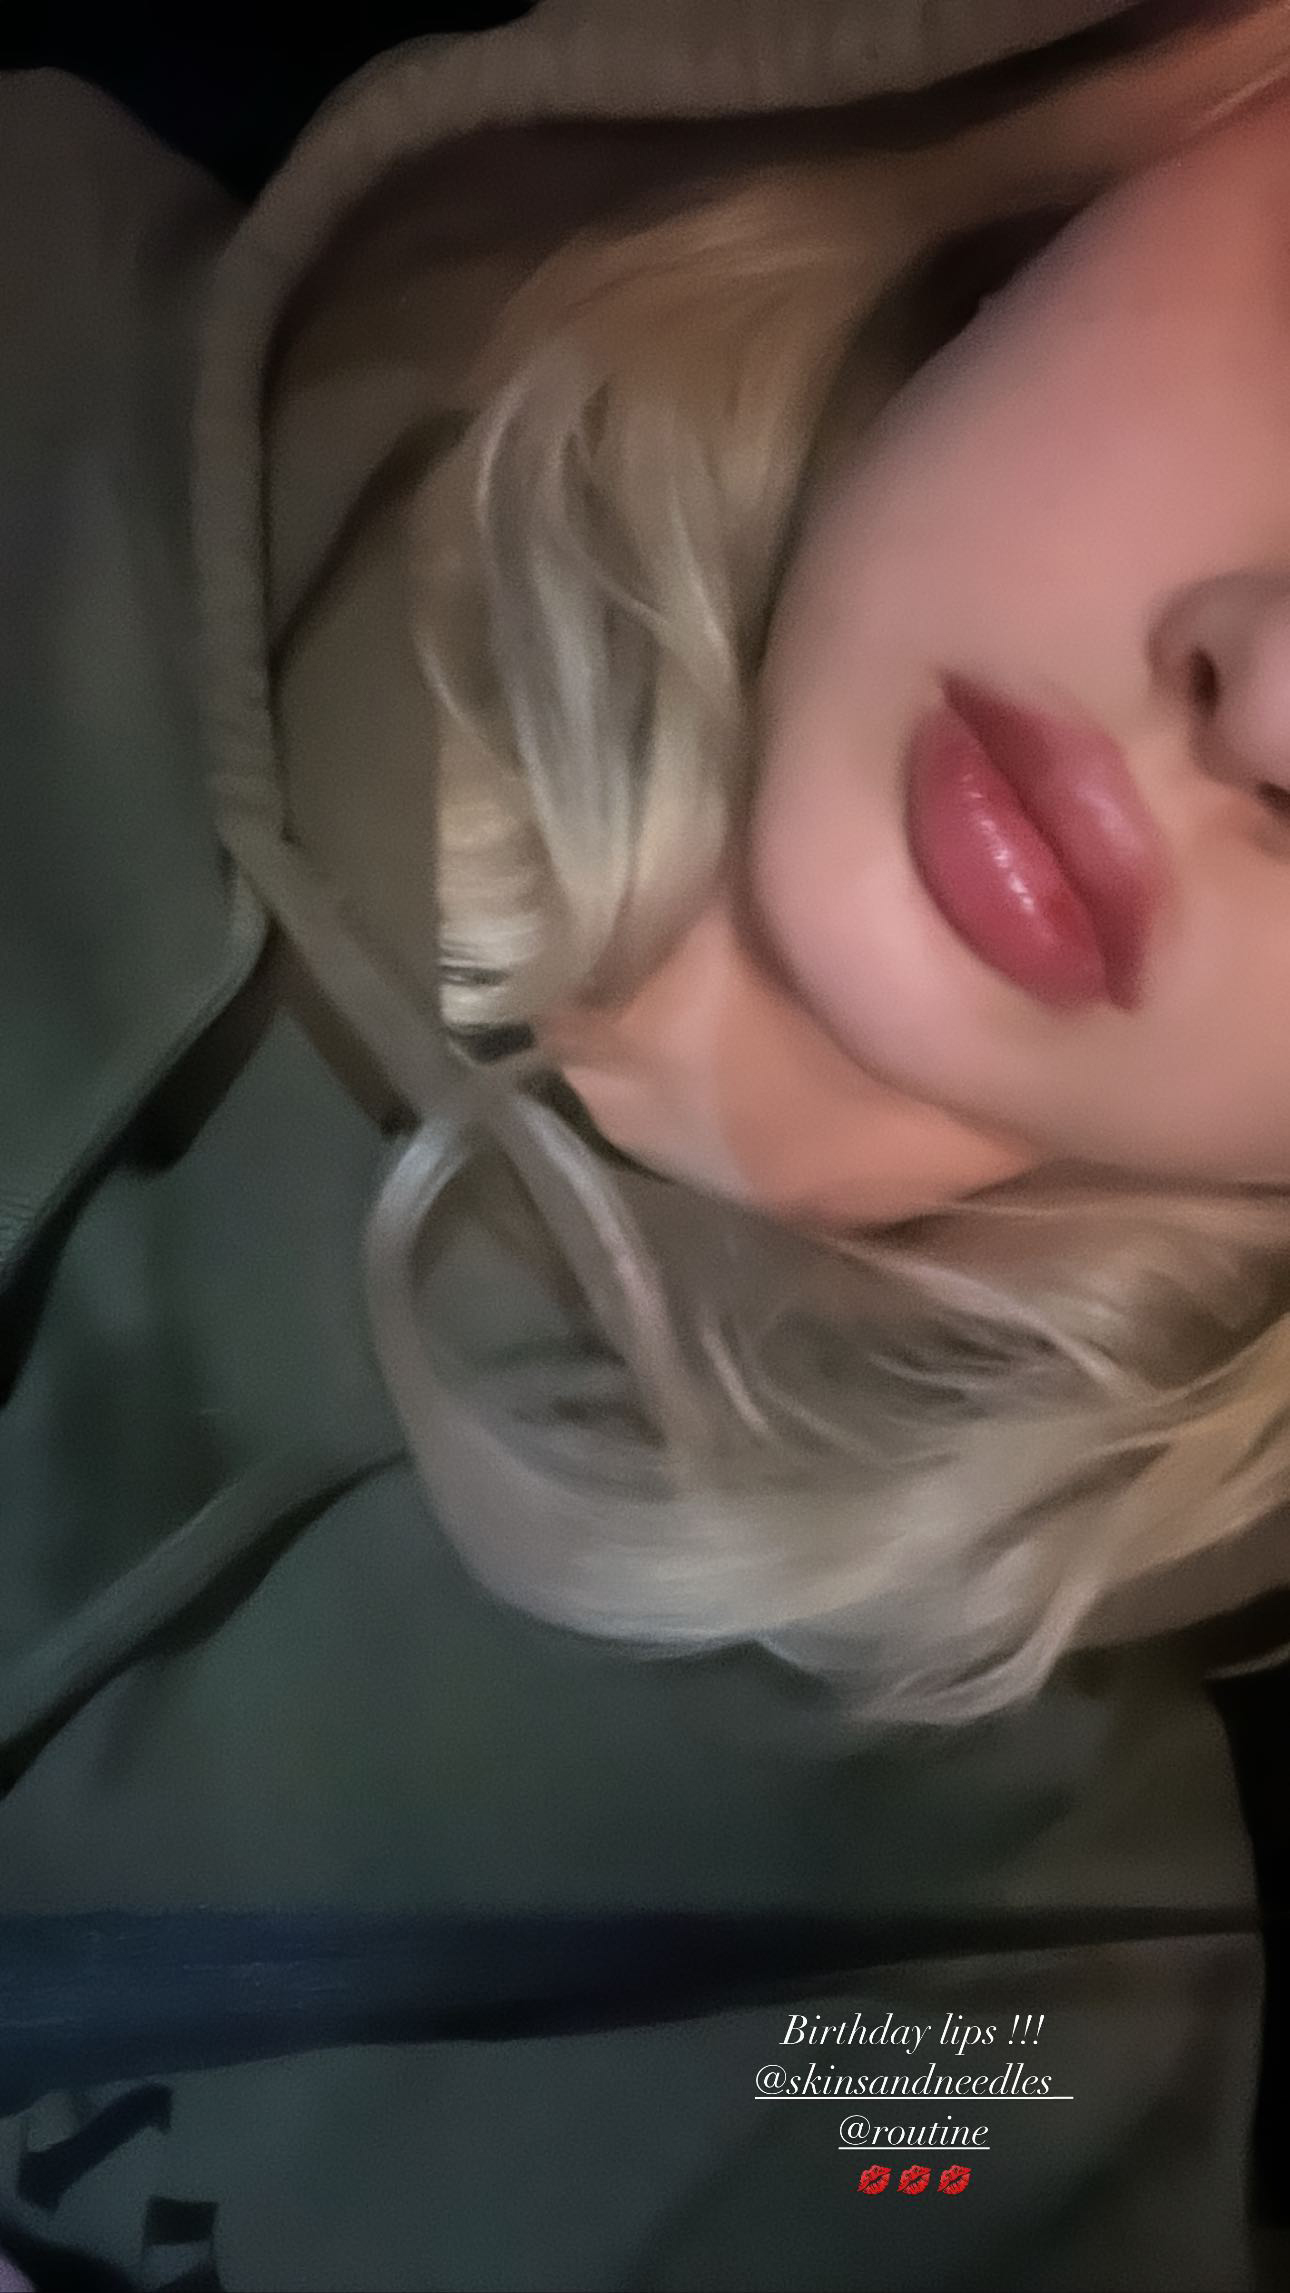 Alabama teased that she got lip fillers for an early 18th birthday present